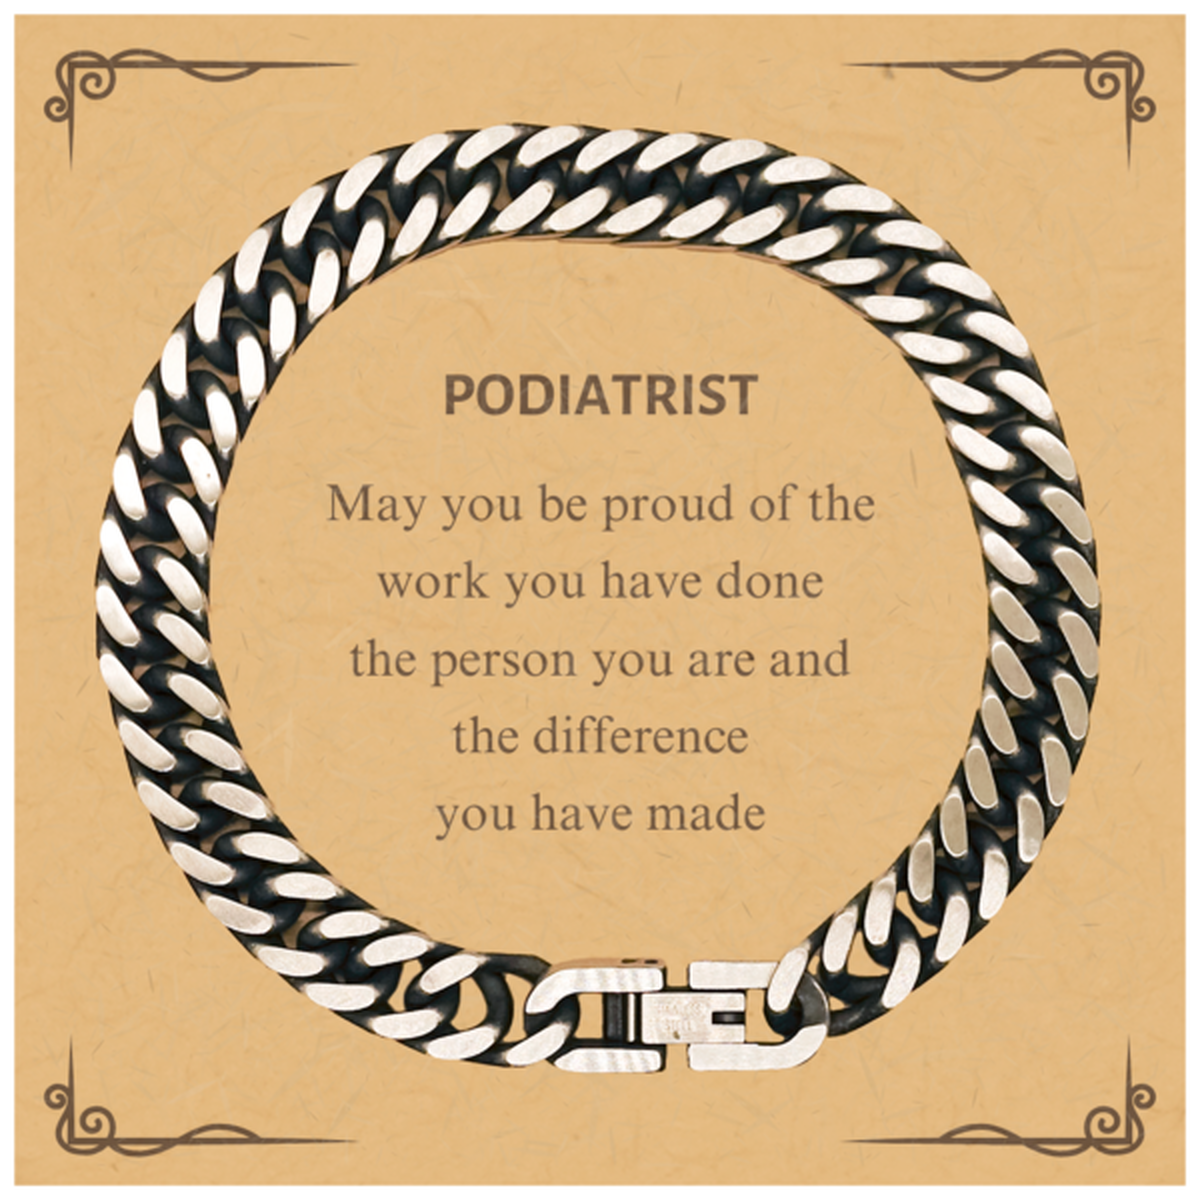 Podiatrist May you be proud of the work you have done, Retirement Podiatrist Cuban Link Chain Bracelet for Colleague Appreciation Gifts Amazing for Podiatrist